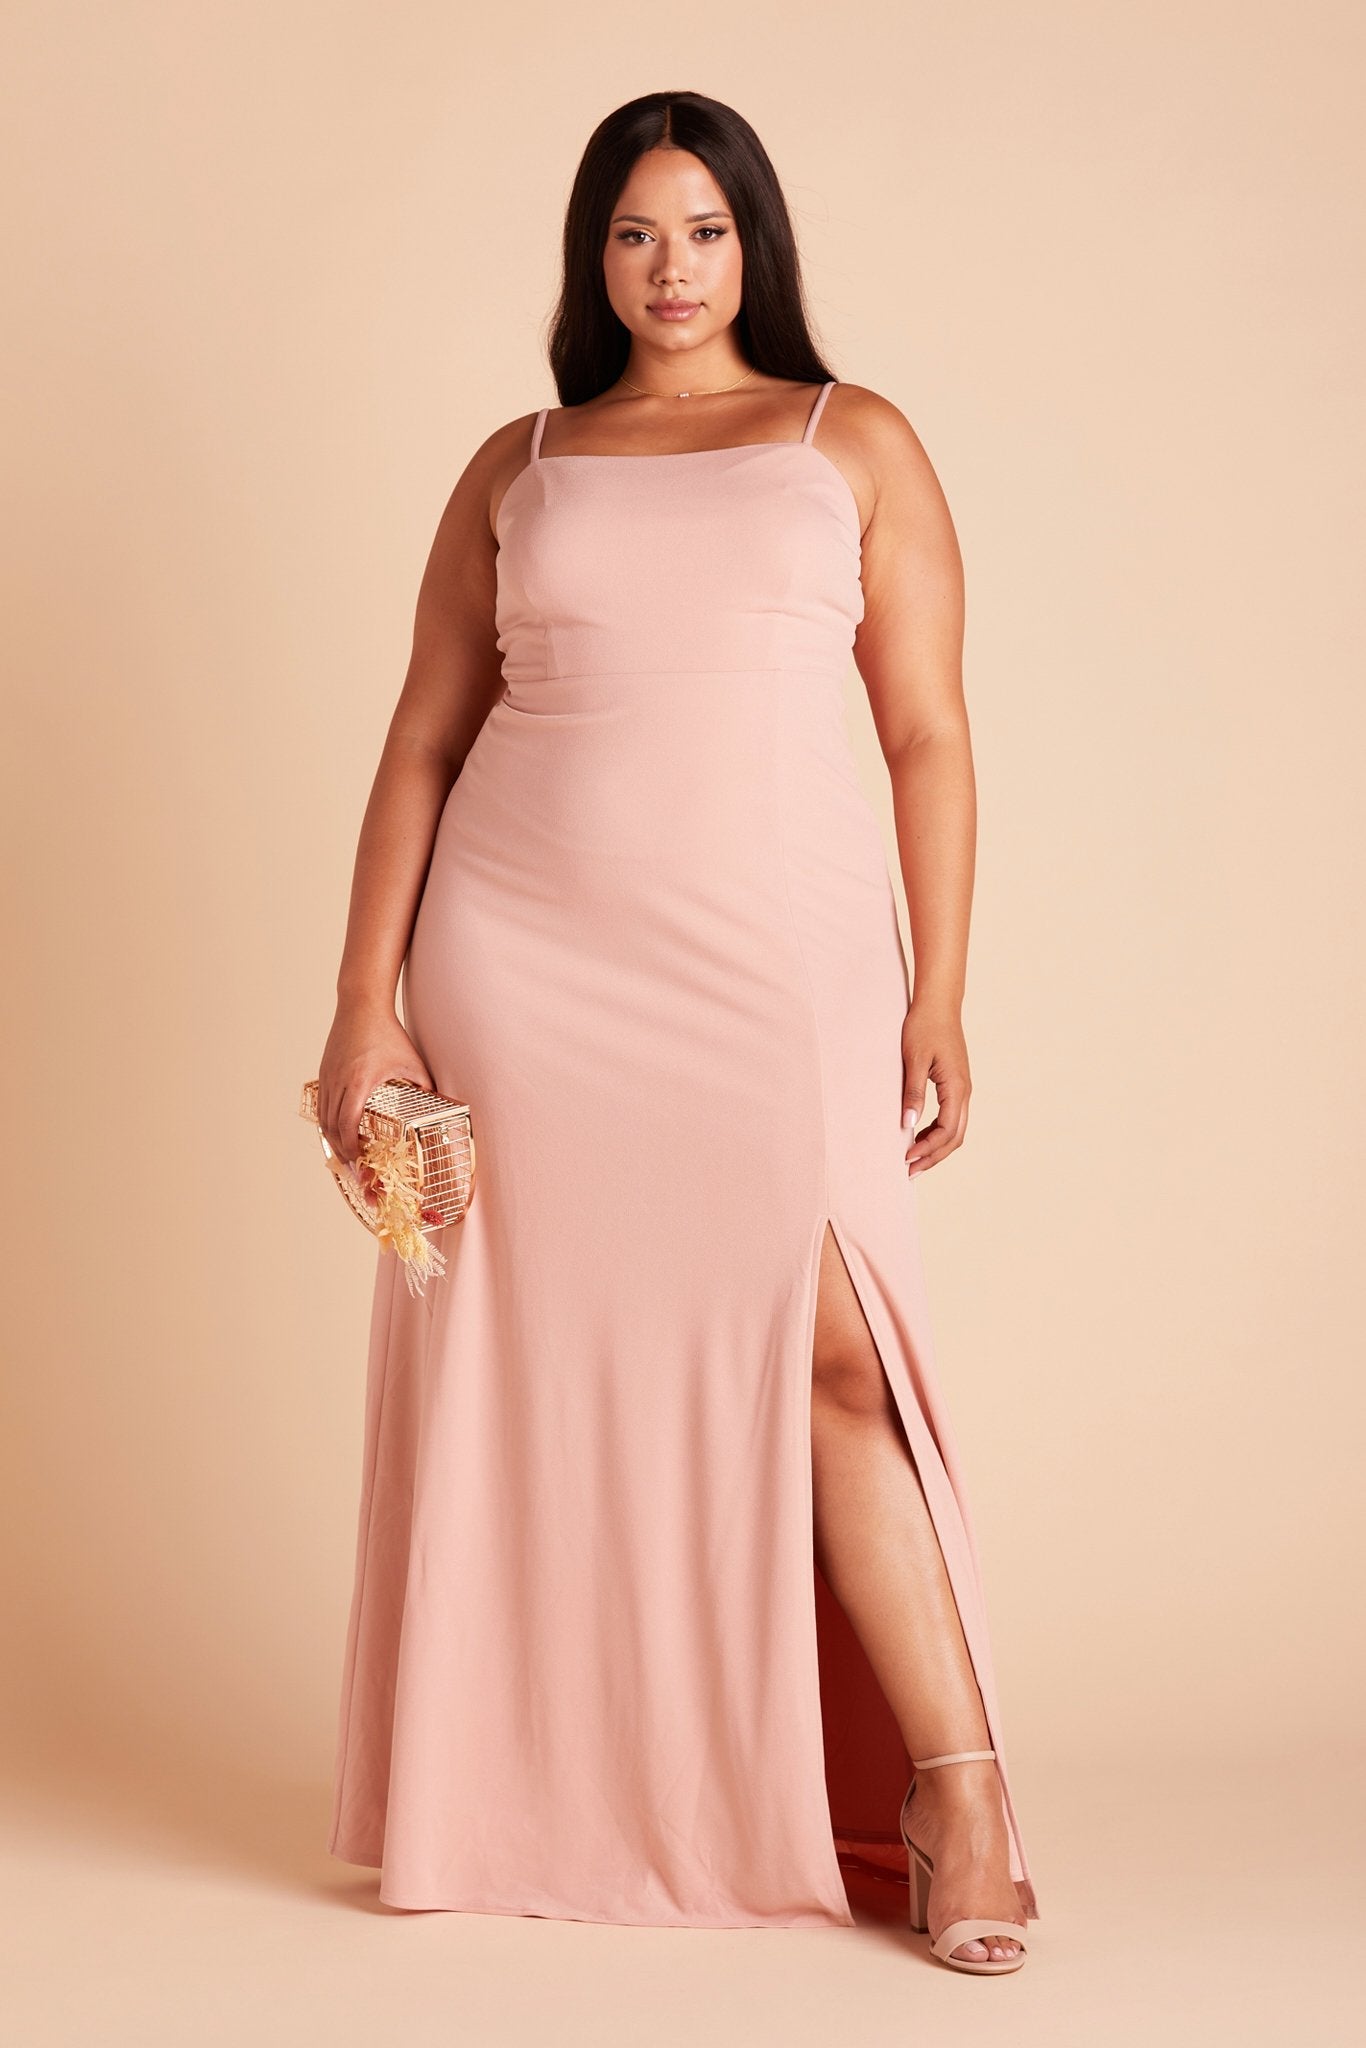 Benny plus size bridesmaid dress in dusty rose crepe by Birdy Grey, front view